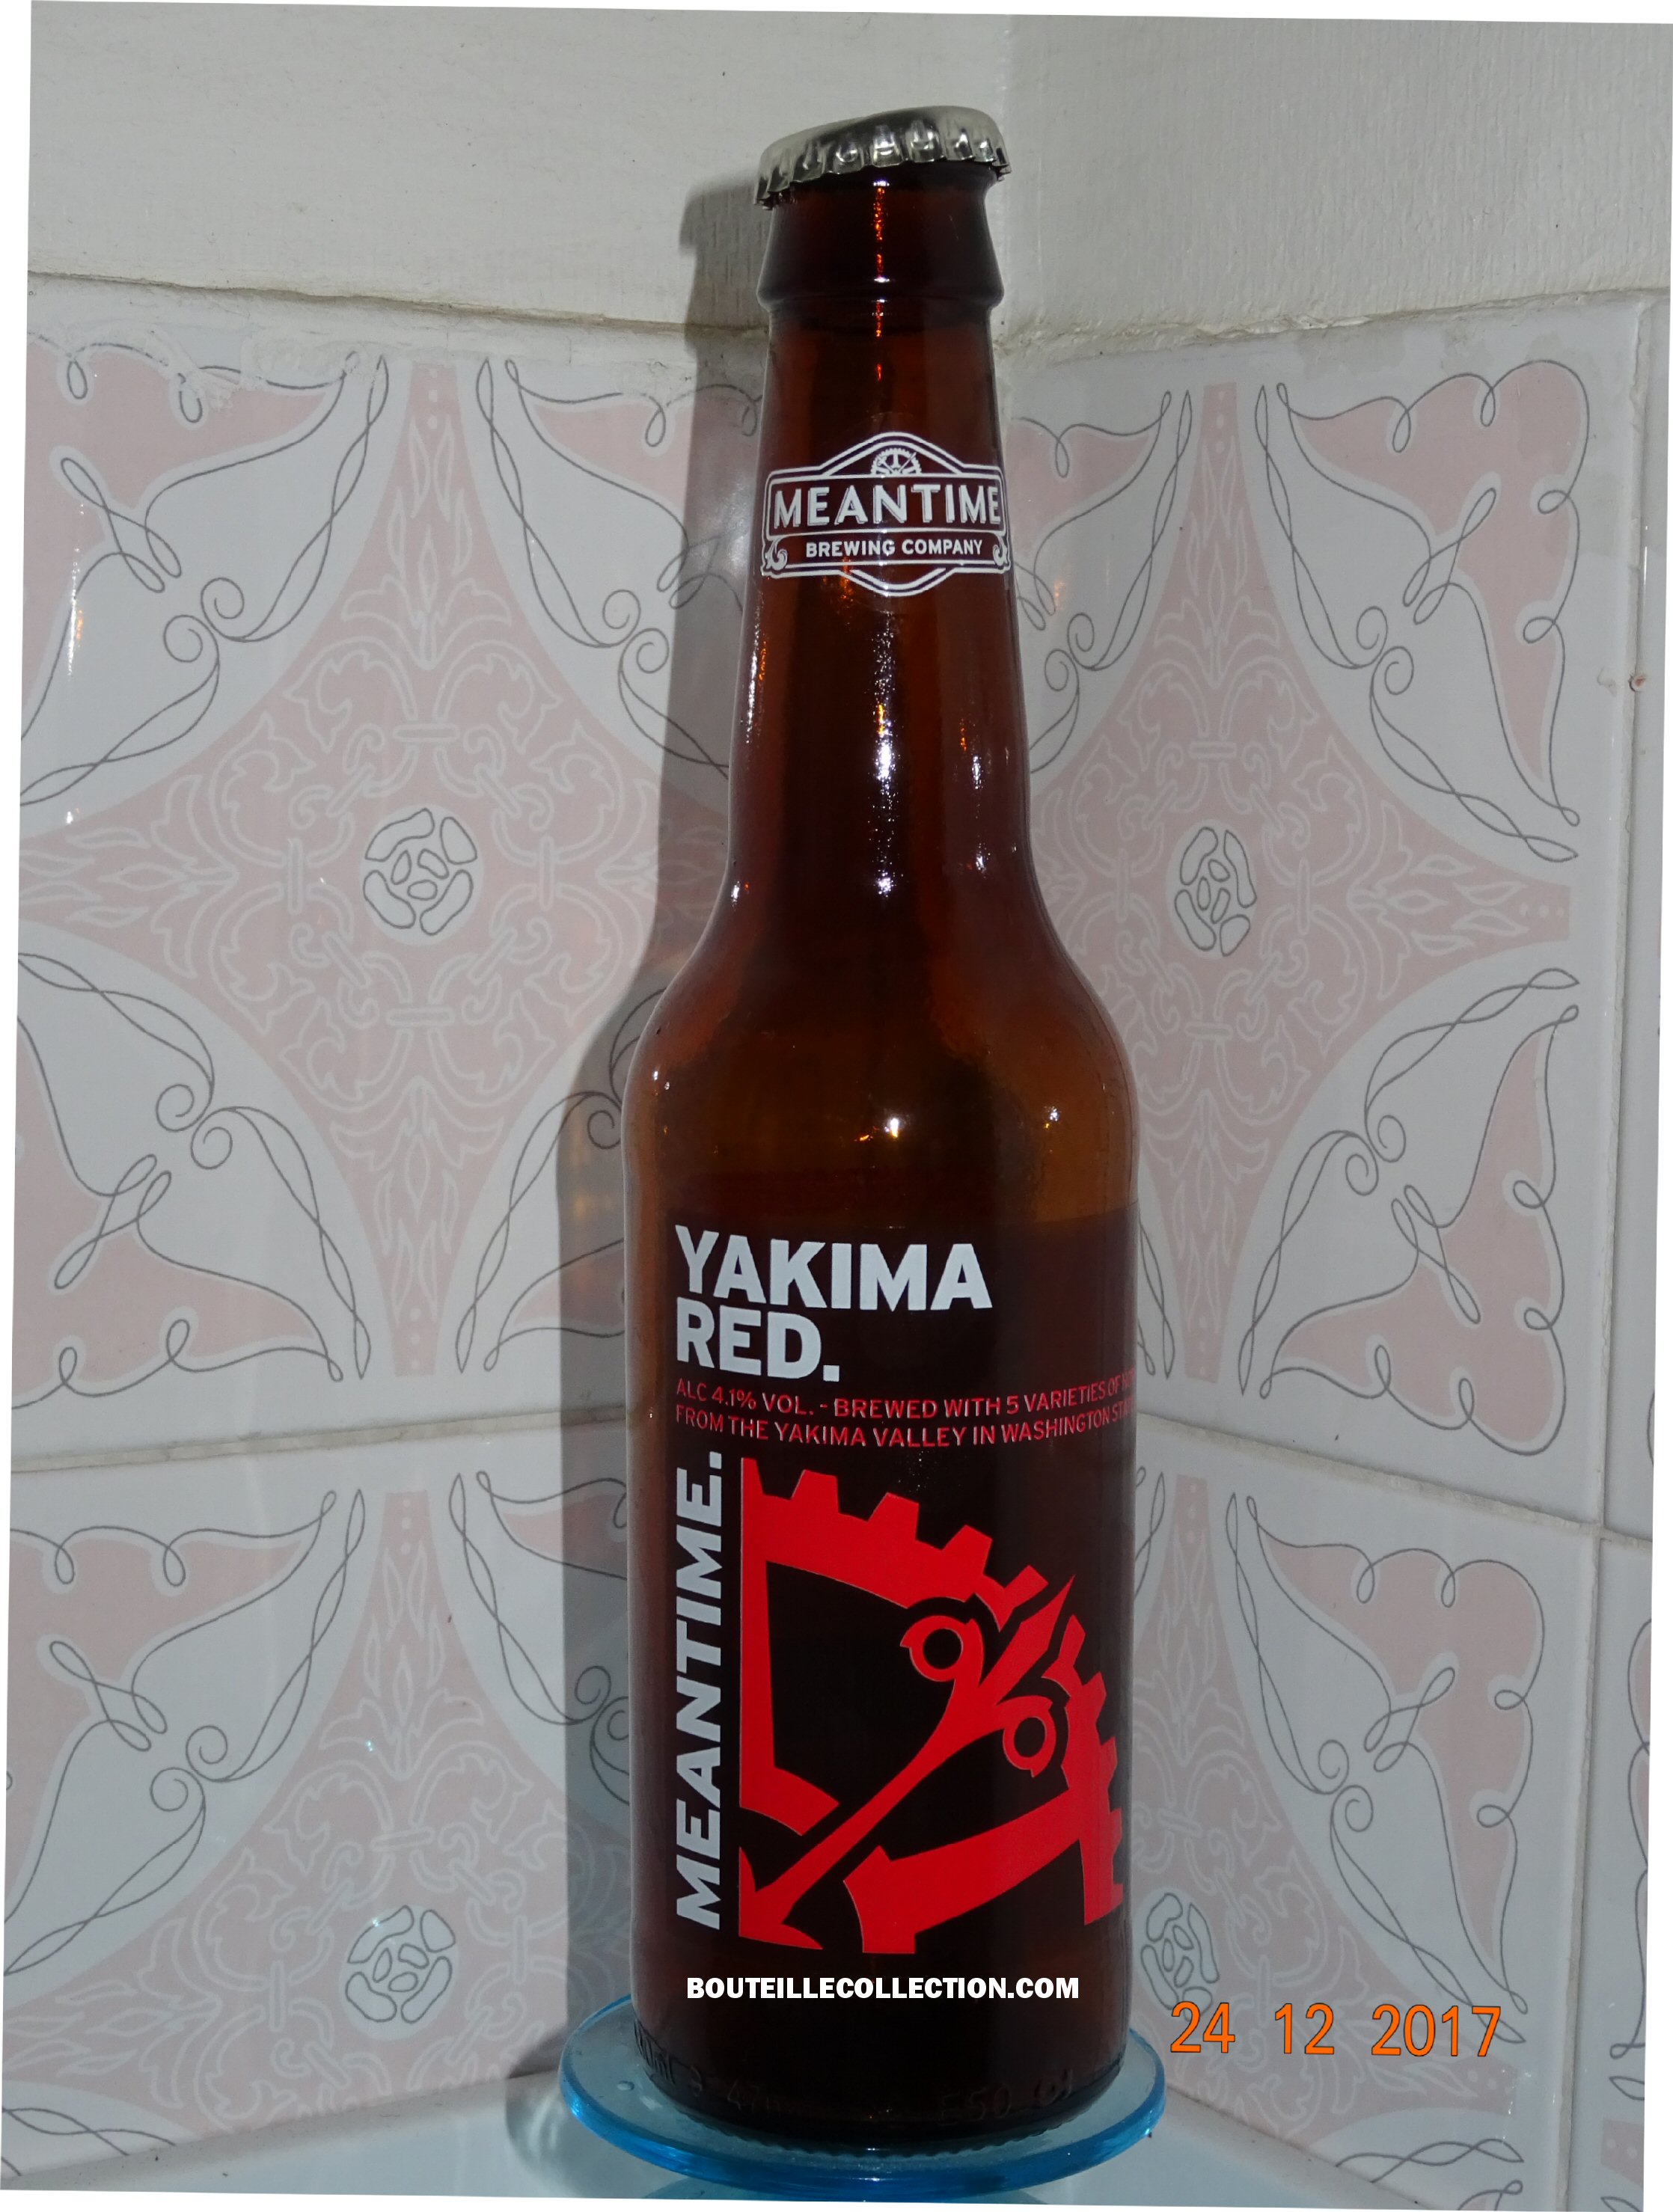 MEANTIME YAKIMA RED 33CL AB.jpg